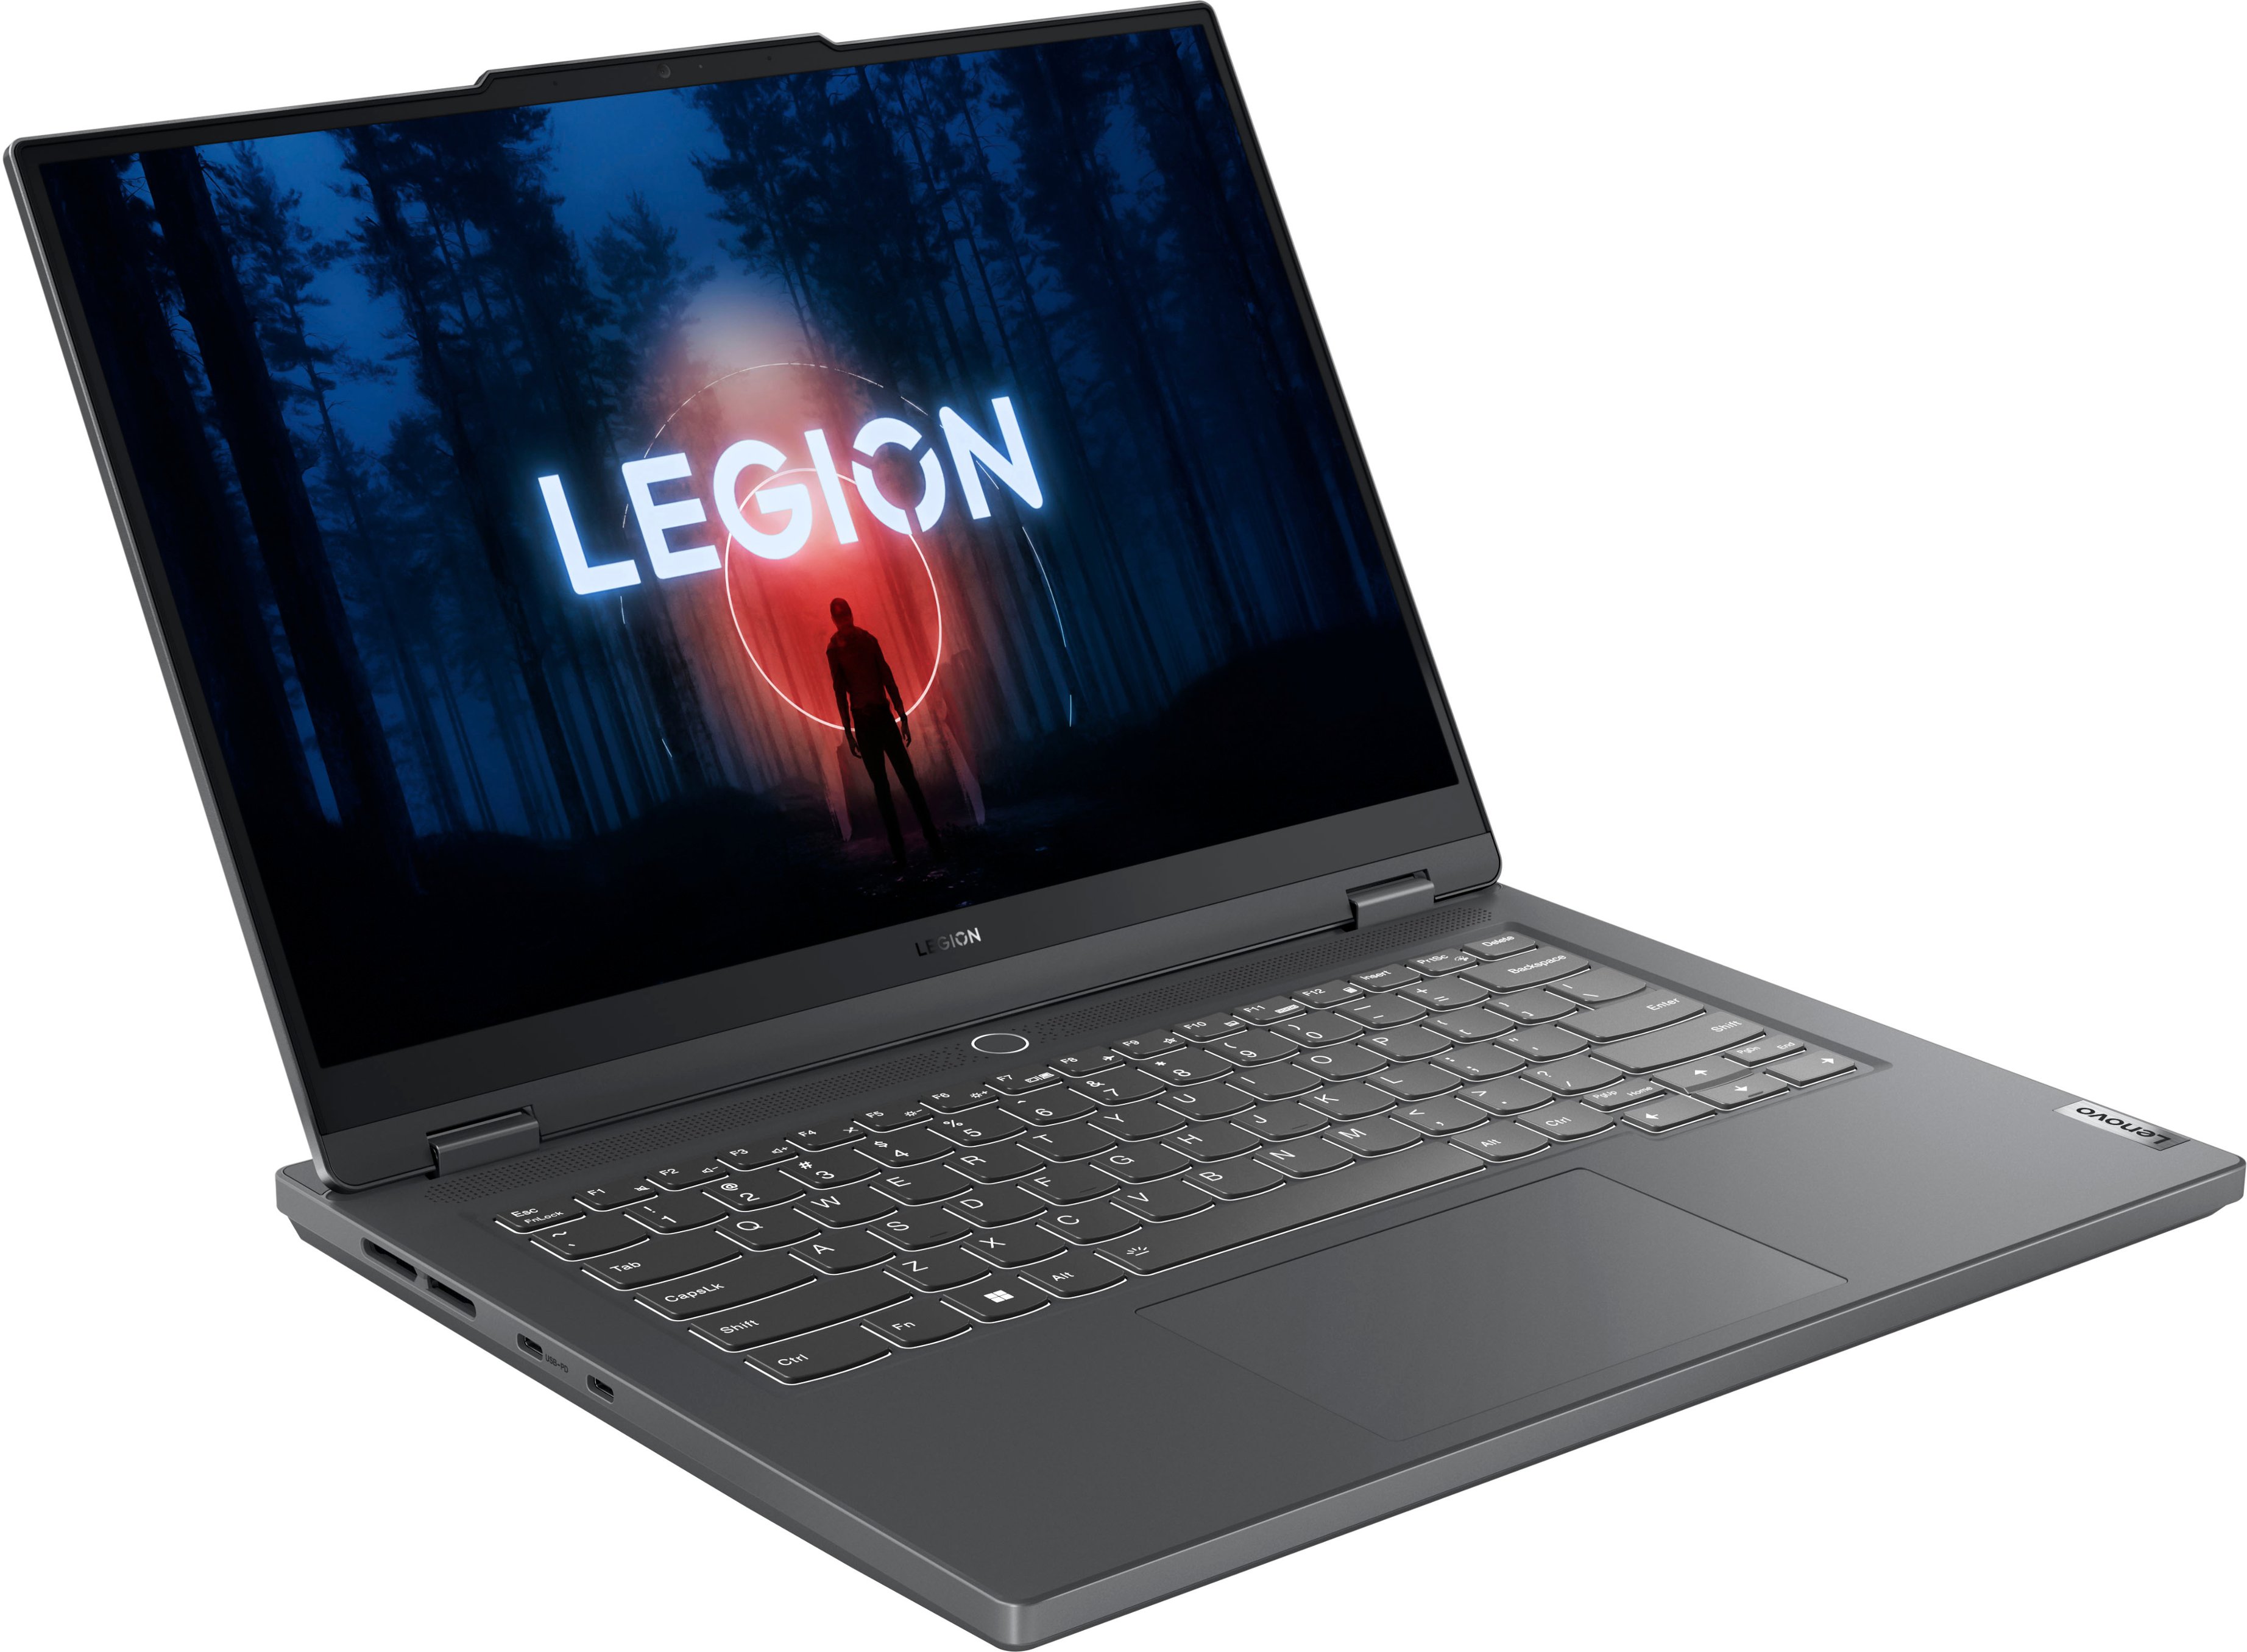 Lenovo Legion 5 Slim 14 review: another win for affordable gaming laptops